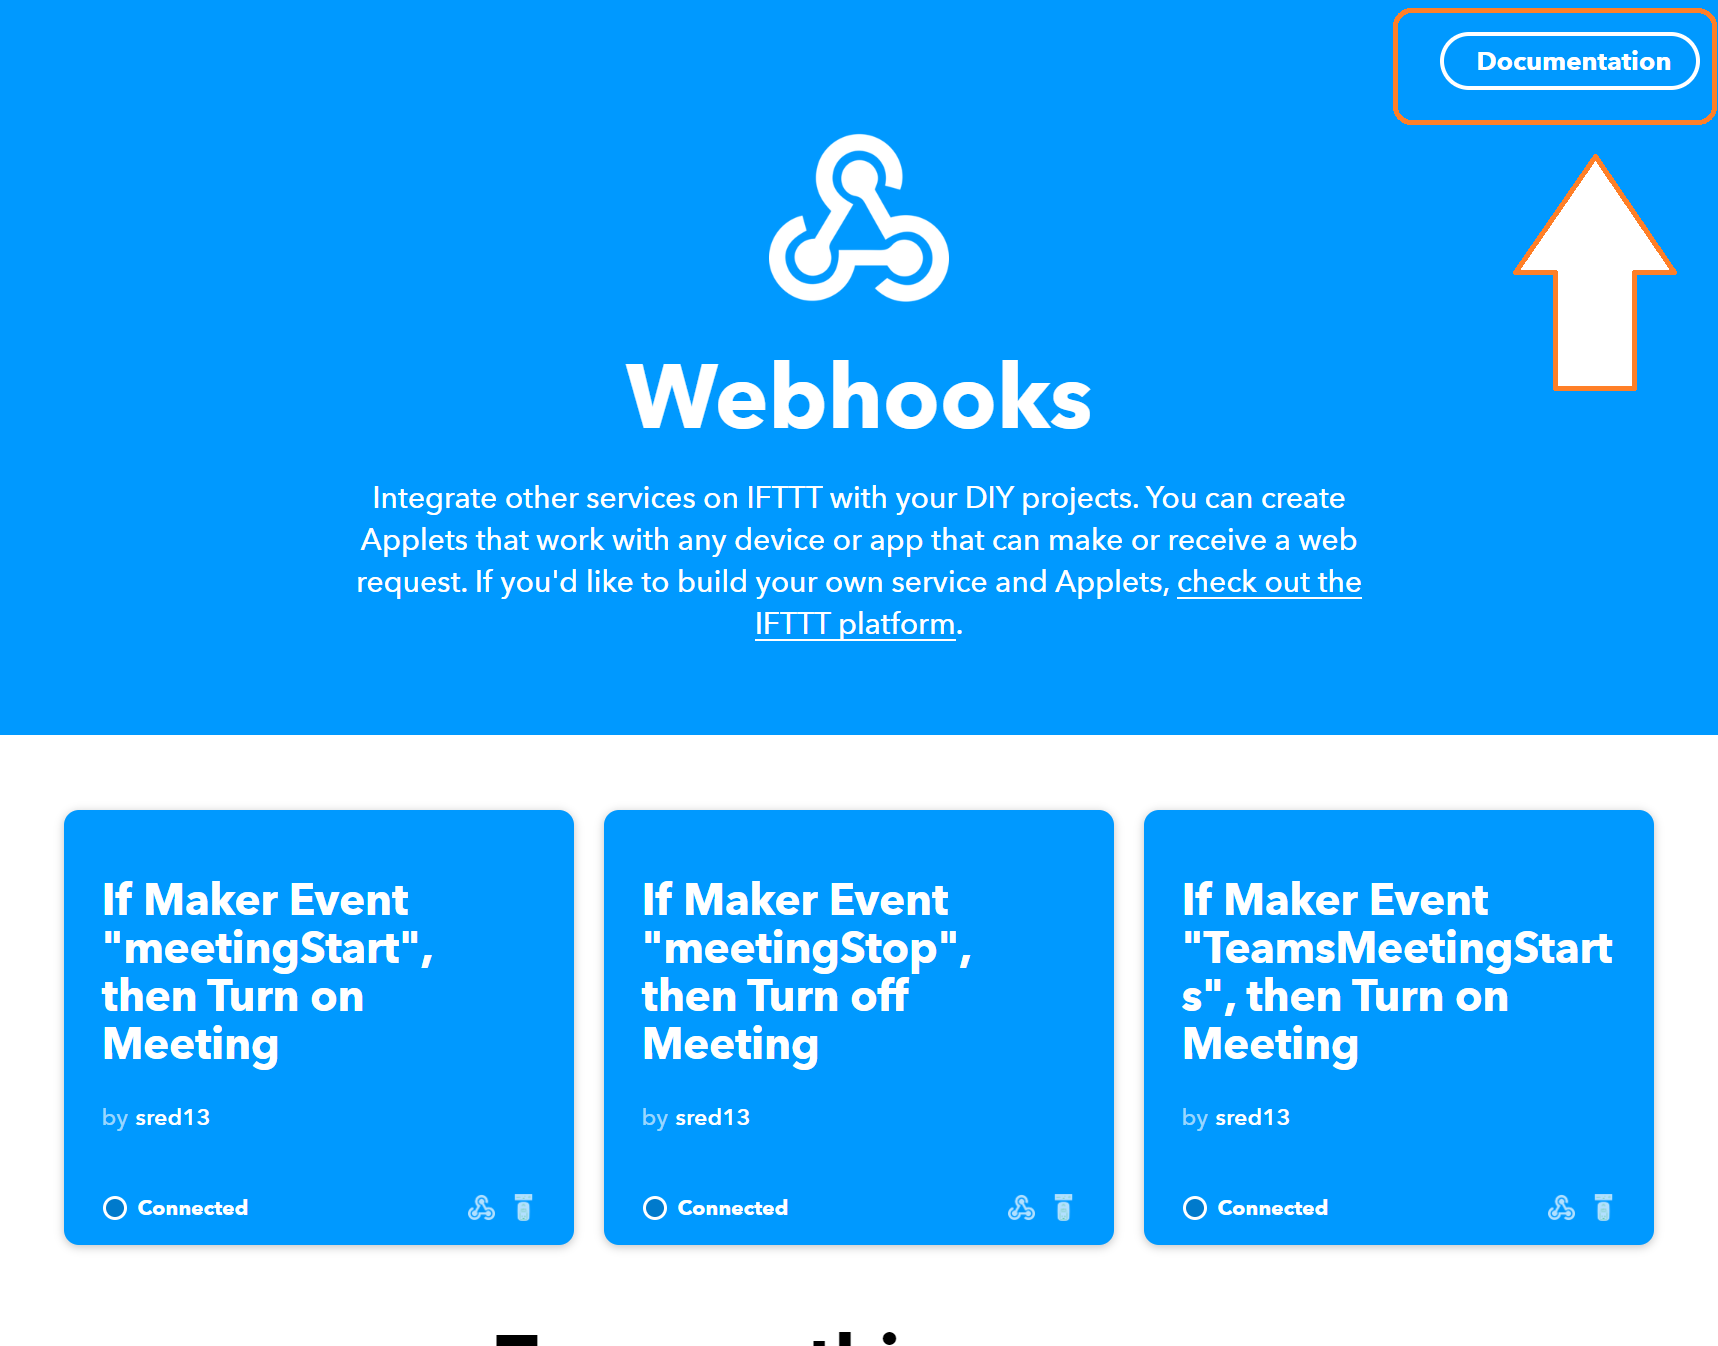 Depicts the maker\webhooks page and shows a box drawn around the large 'Documentation' button on the corner. 